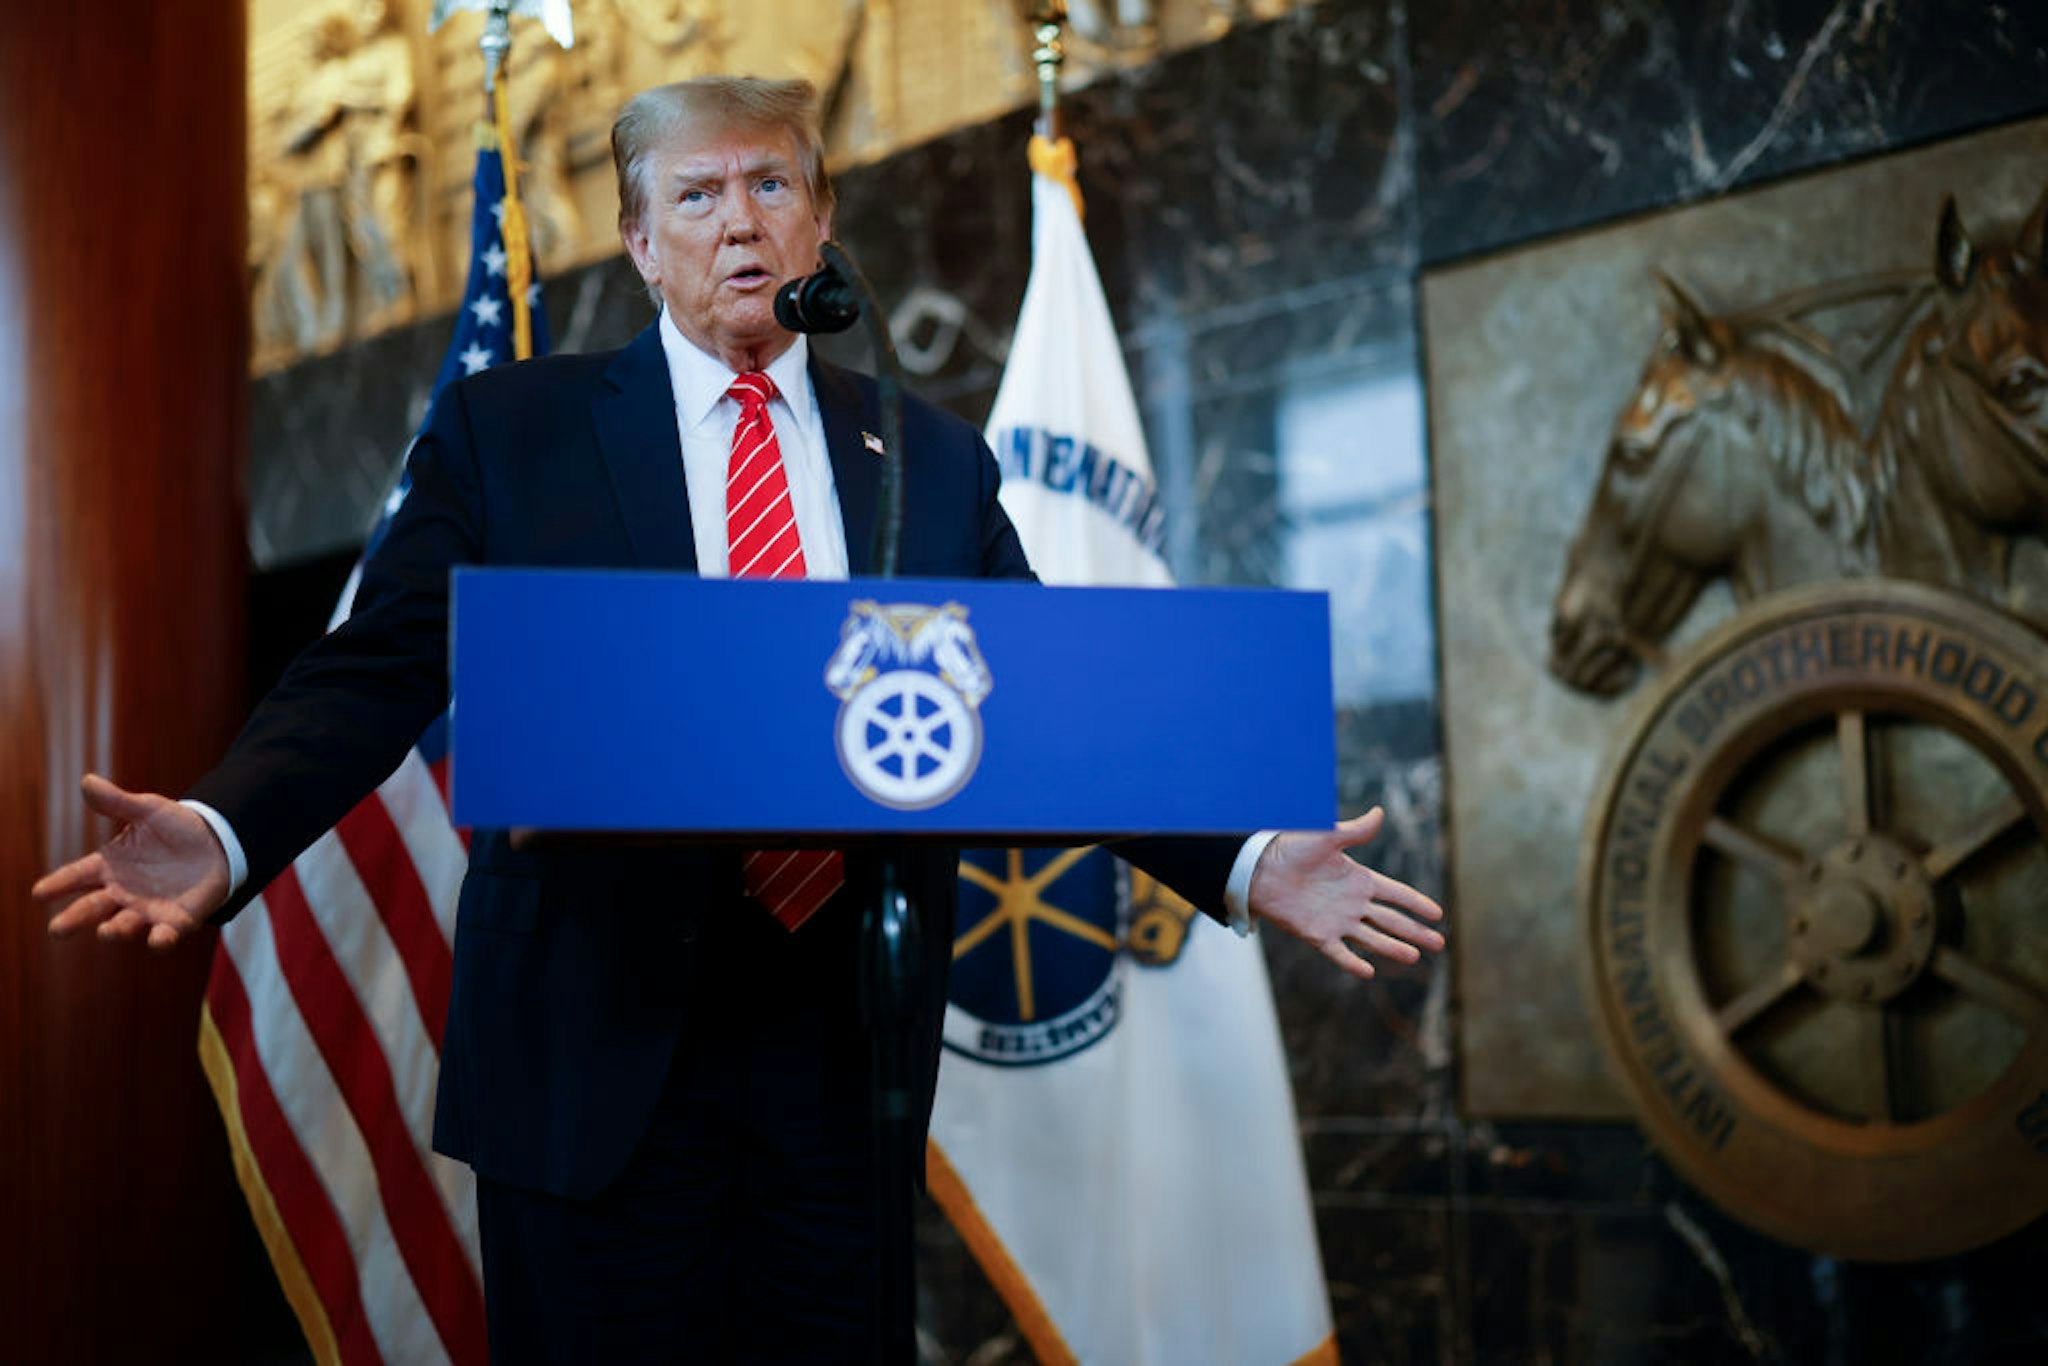 WASHINGTON, DC - JANUARY 31: Republican presidential candidate and former U.S. President Donald Trump delivers remarks after meeting with leaders of the International Brotherhood of Teamsters at their headquarters on January 31, 2024 in Washington, DC. The United Auto Workers endorsed President Joe Biden's re-election campaign one week ago.